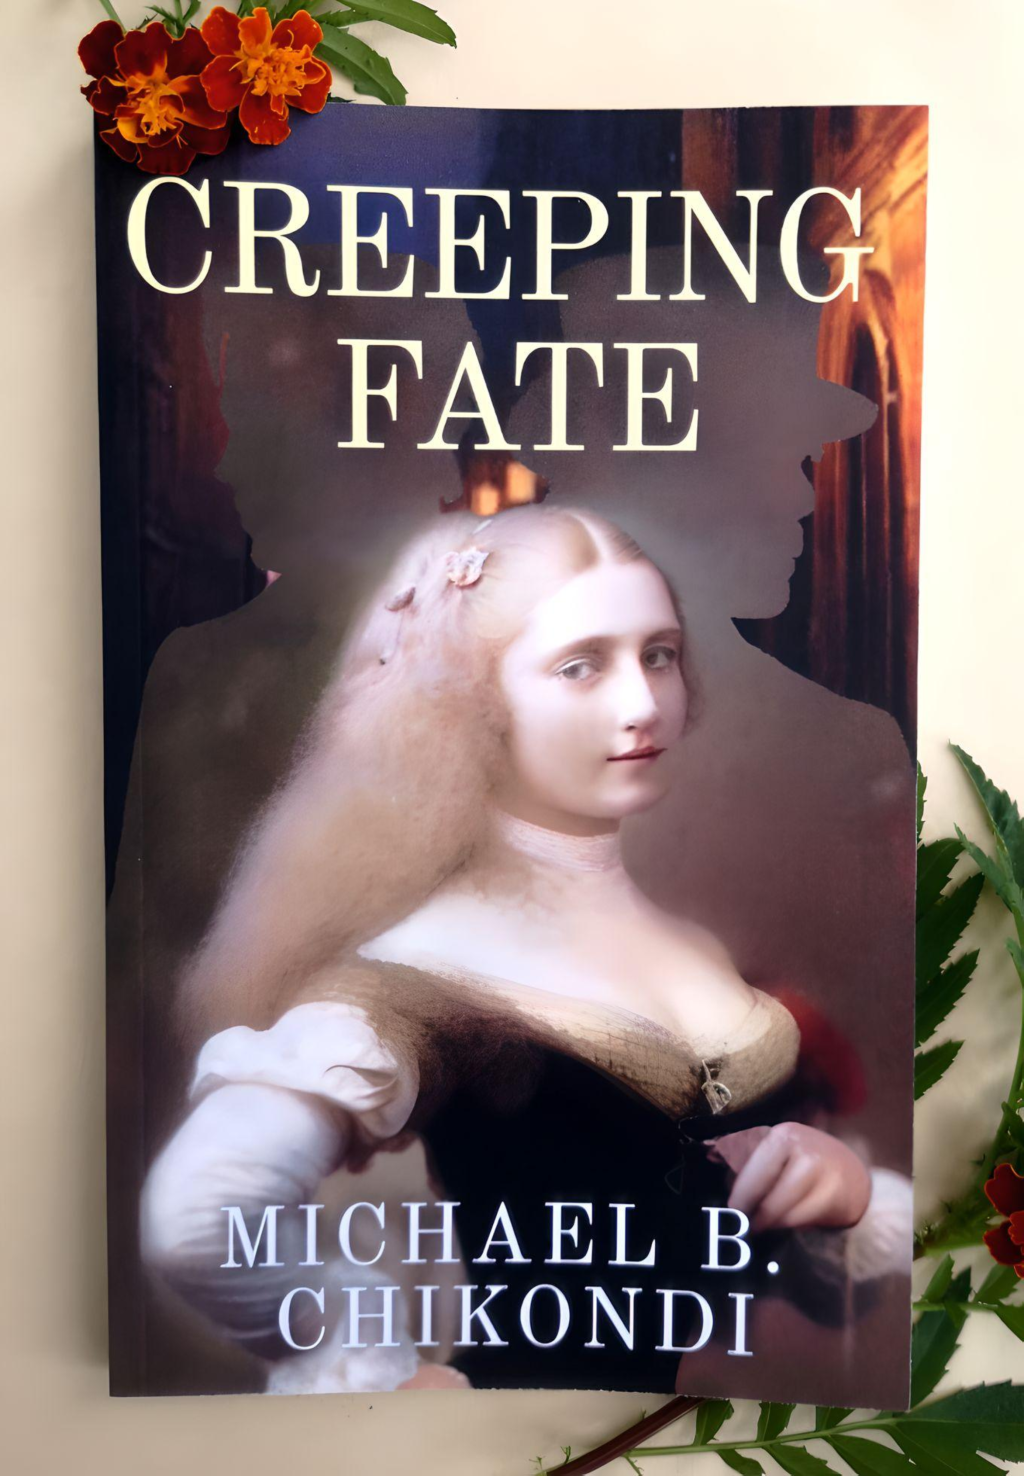 A ‘Creeping Fate’ excerpt